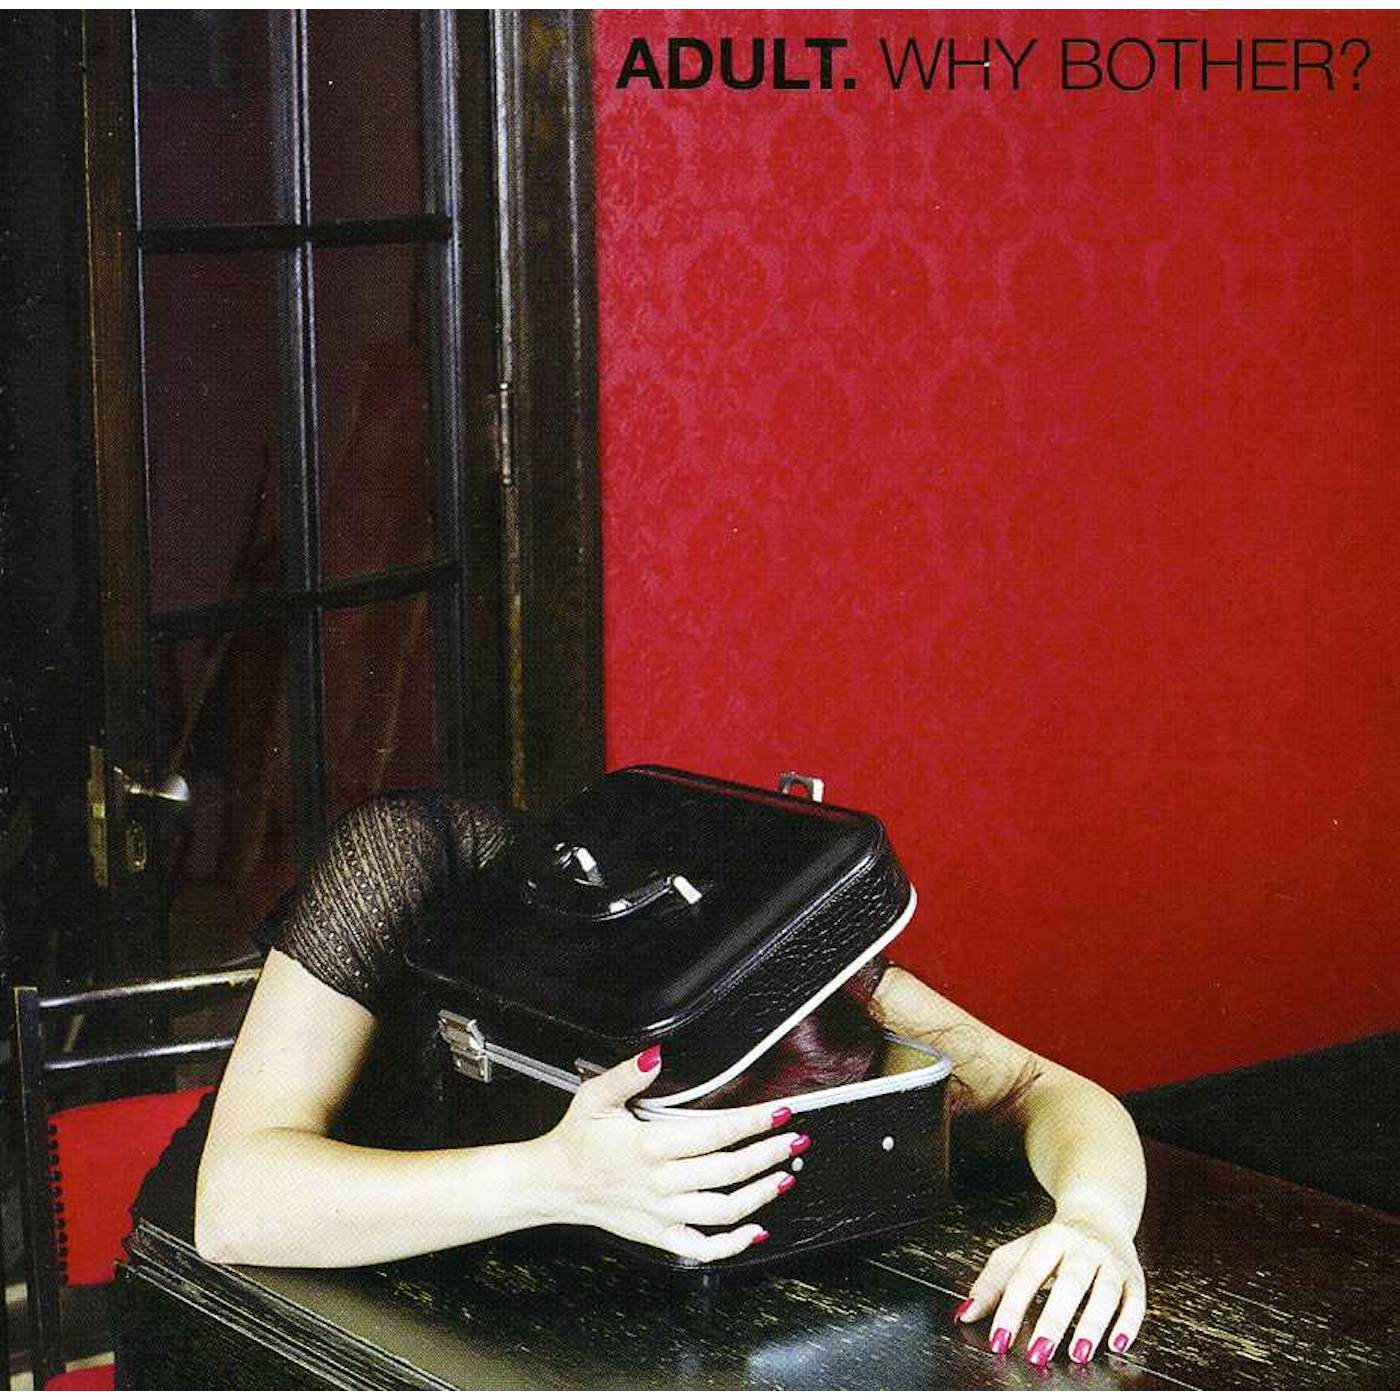 ADULT. WHY BOTHER CD